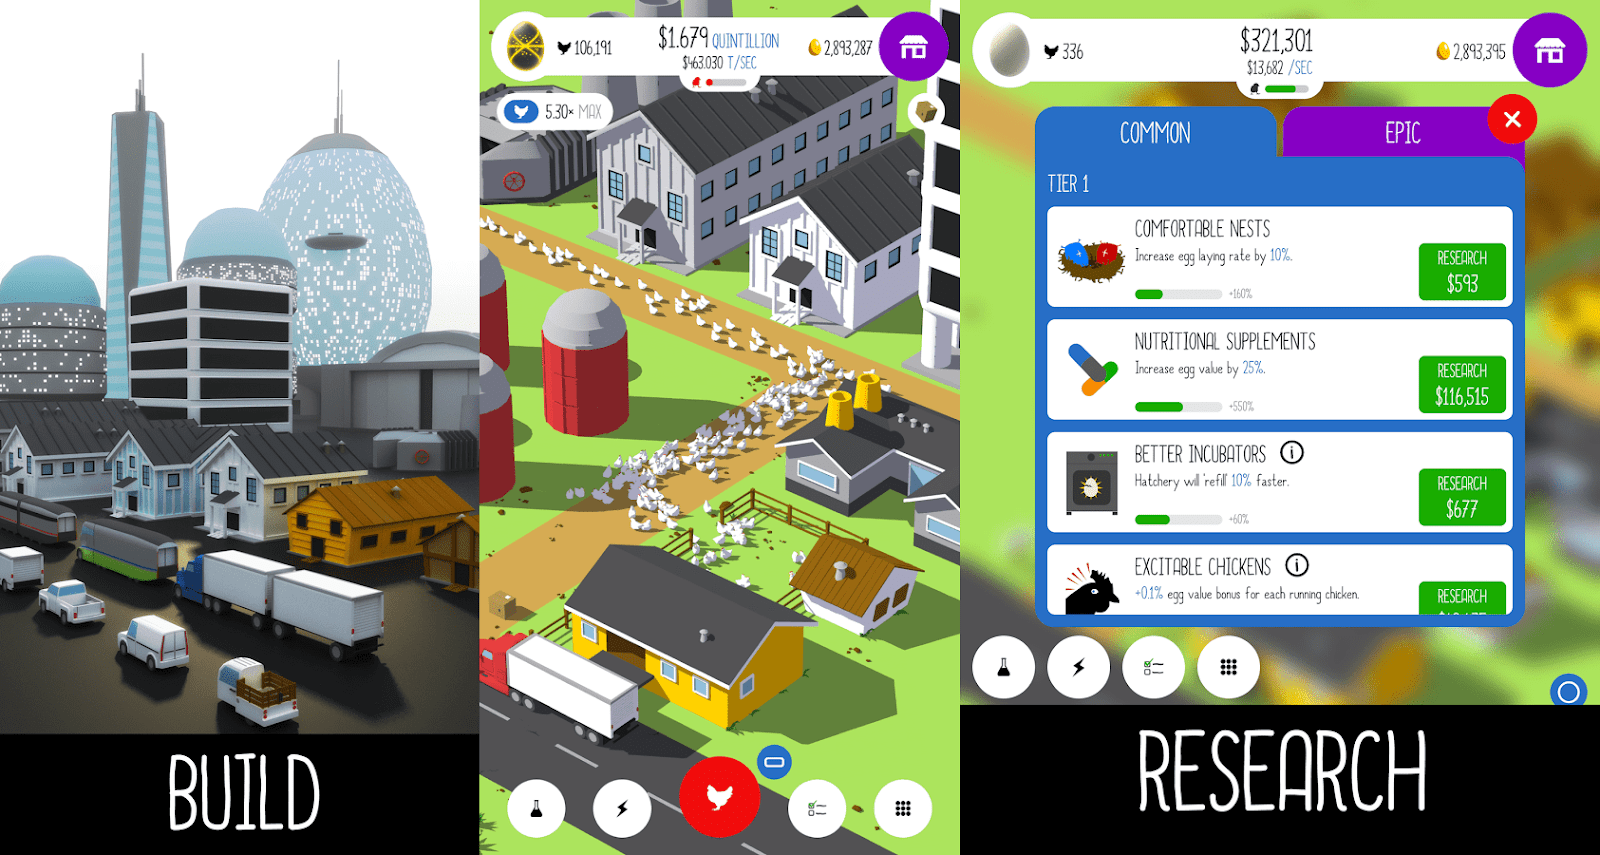 Egg Inc. - Finally An Eggcellent Game That Doesn't Yolk Around